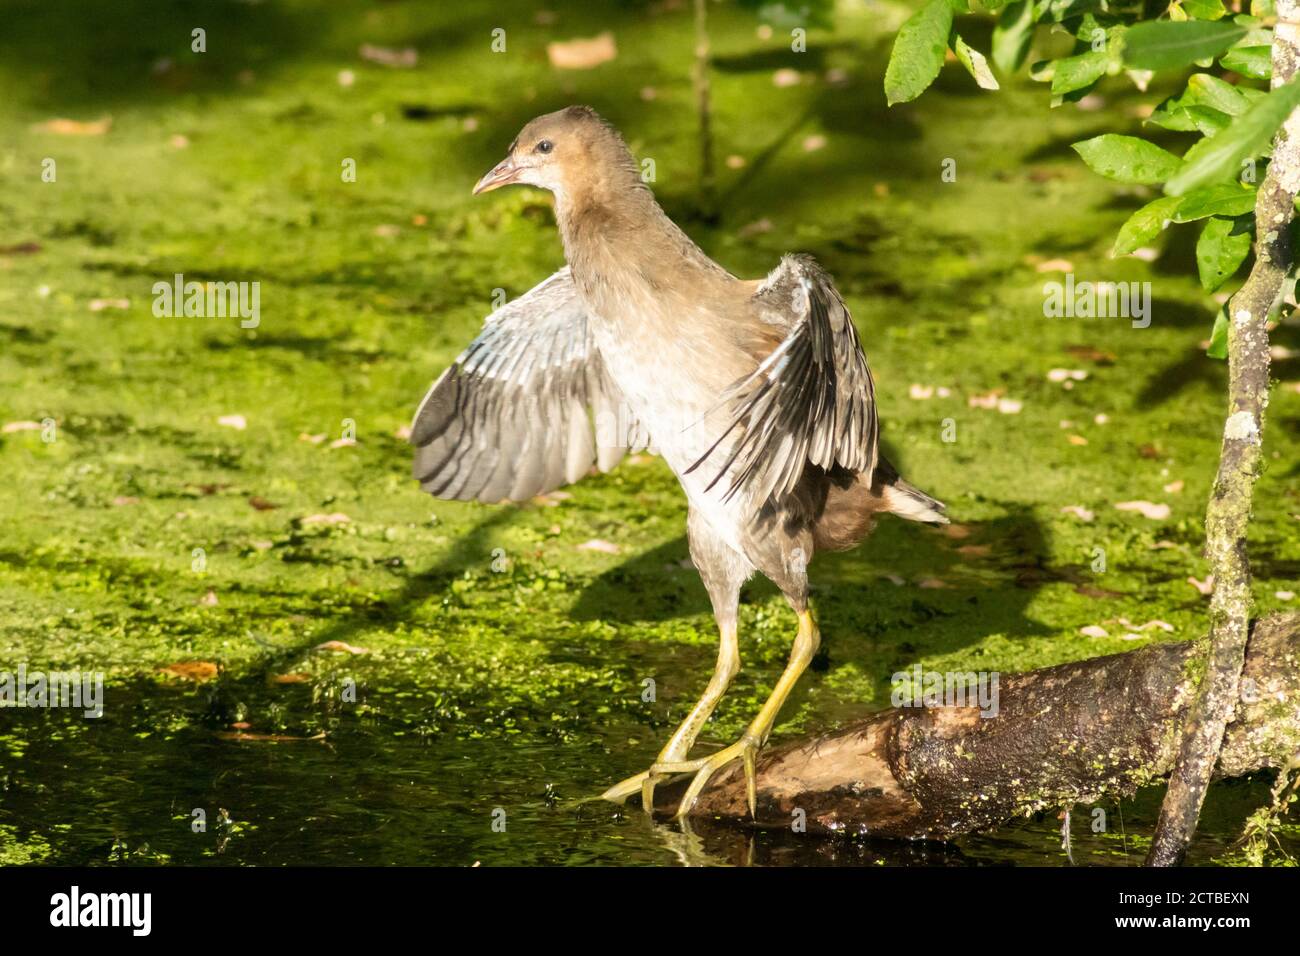 Juvenile Moorhen standing on branch flapping its wings after cleaning or preening. gallinula chloropus, rallidae Stock Photo